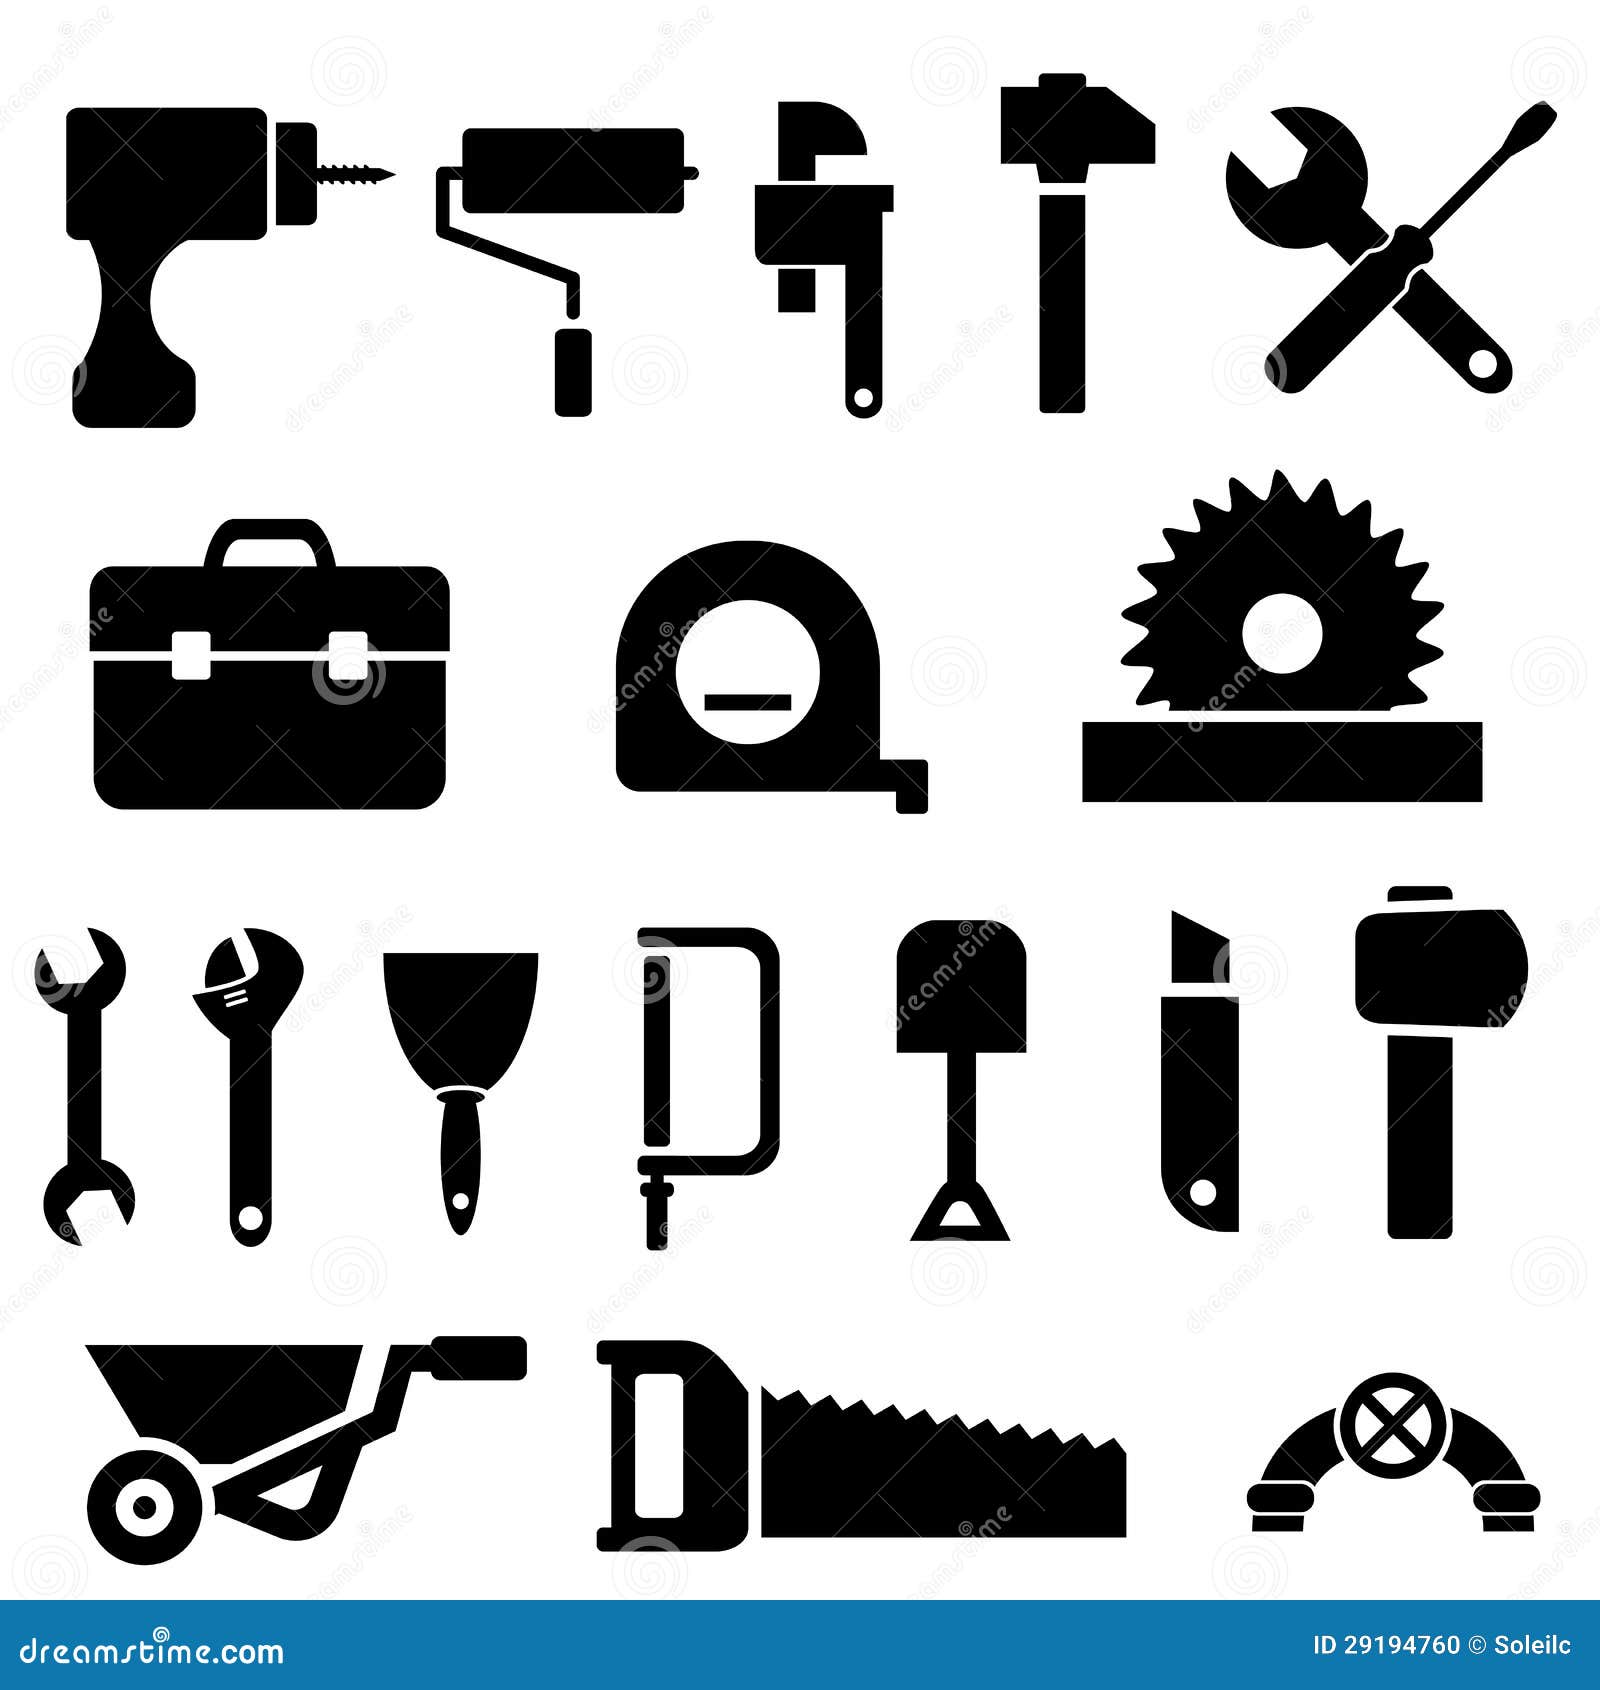 tool icons in black